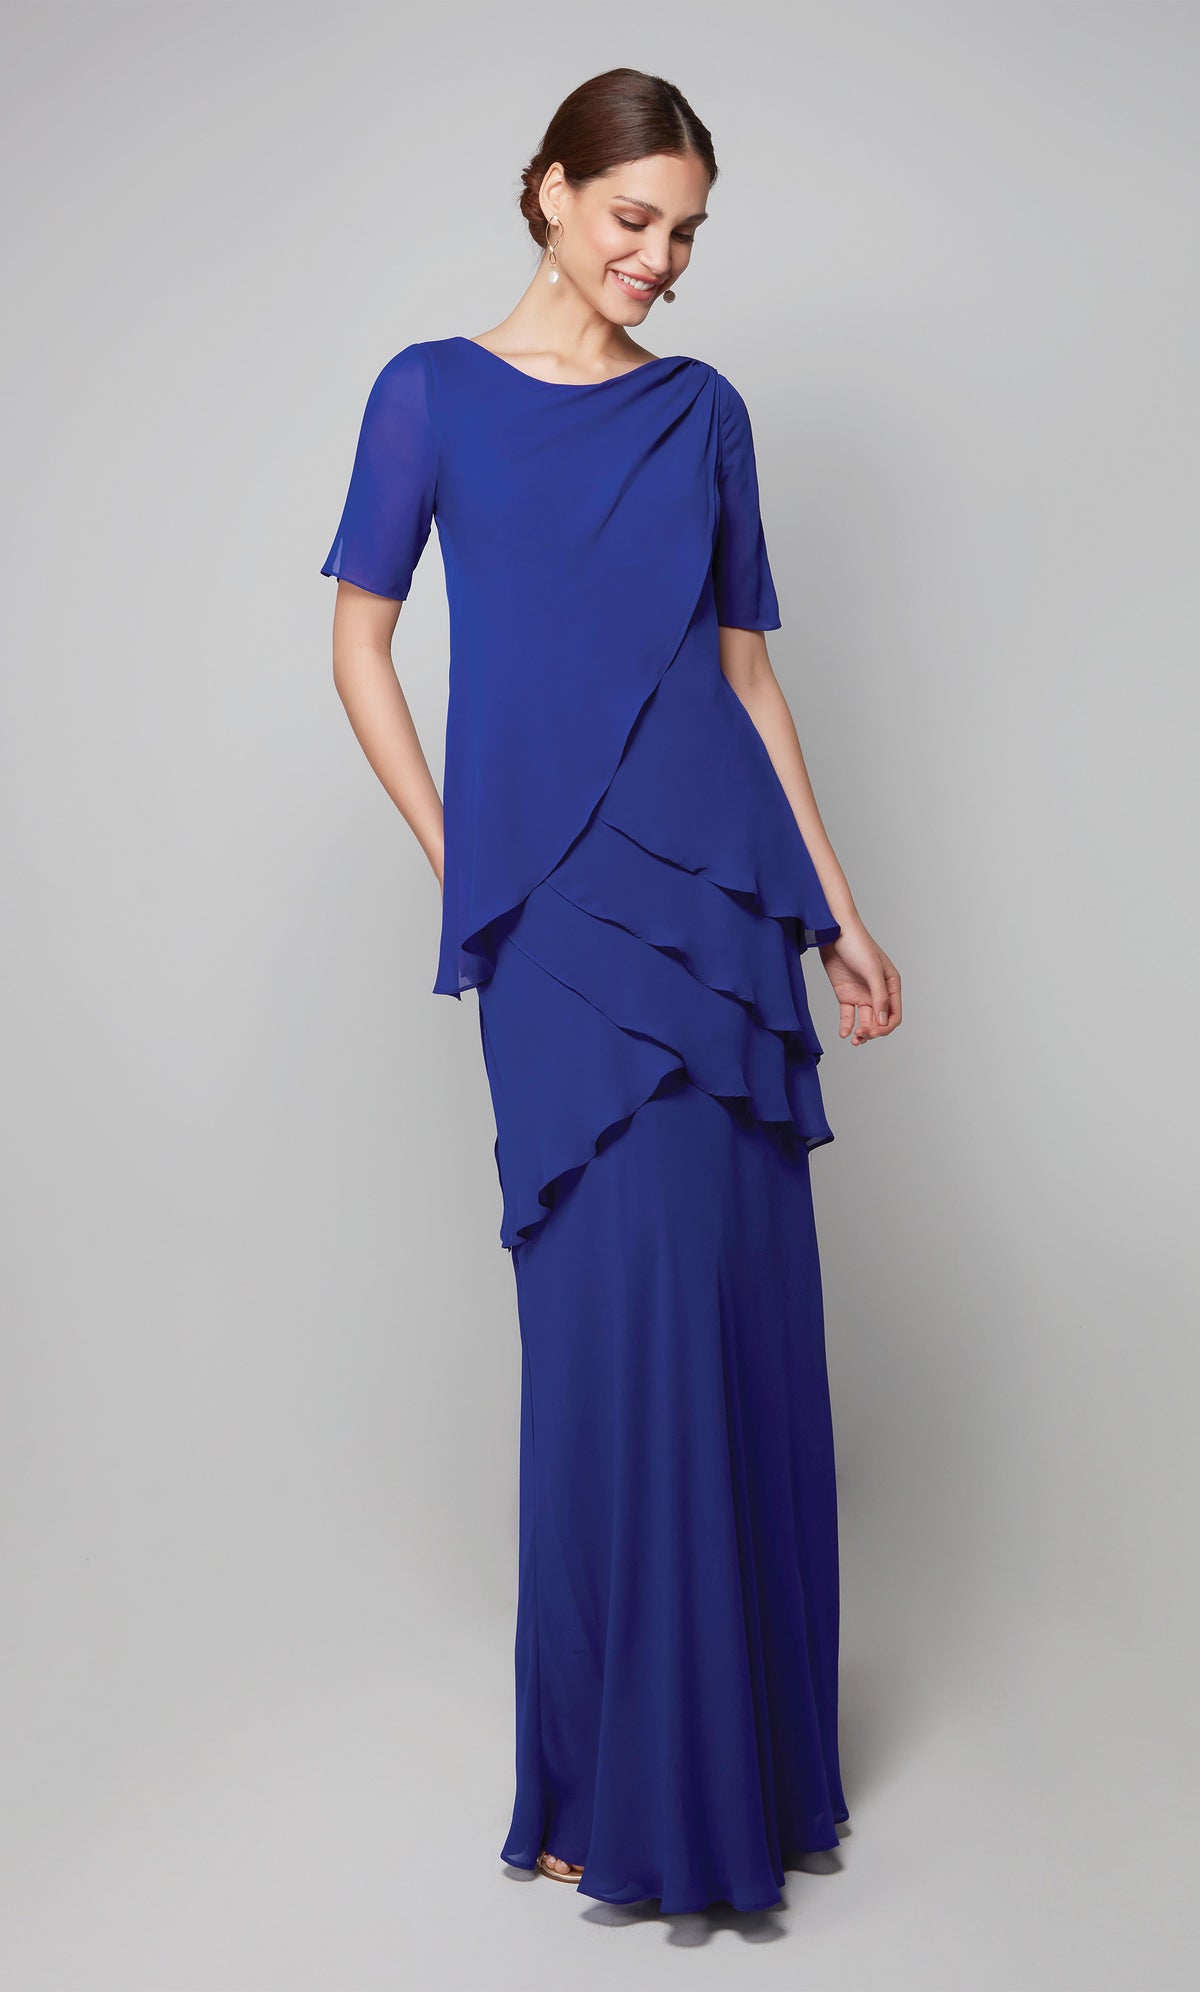 Chiffon modest mother of the bride dress with short sleeves in cobalt blue.